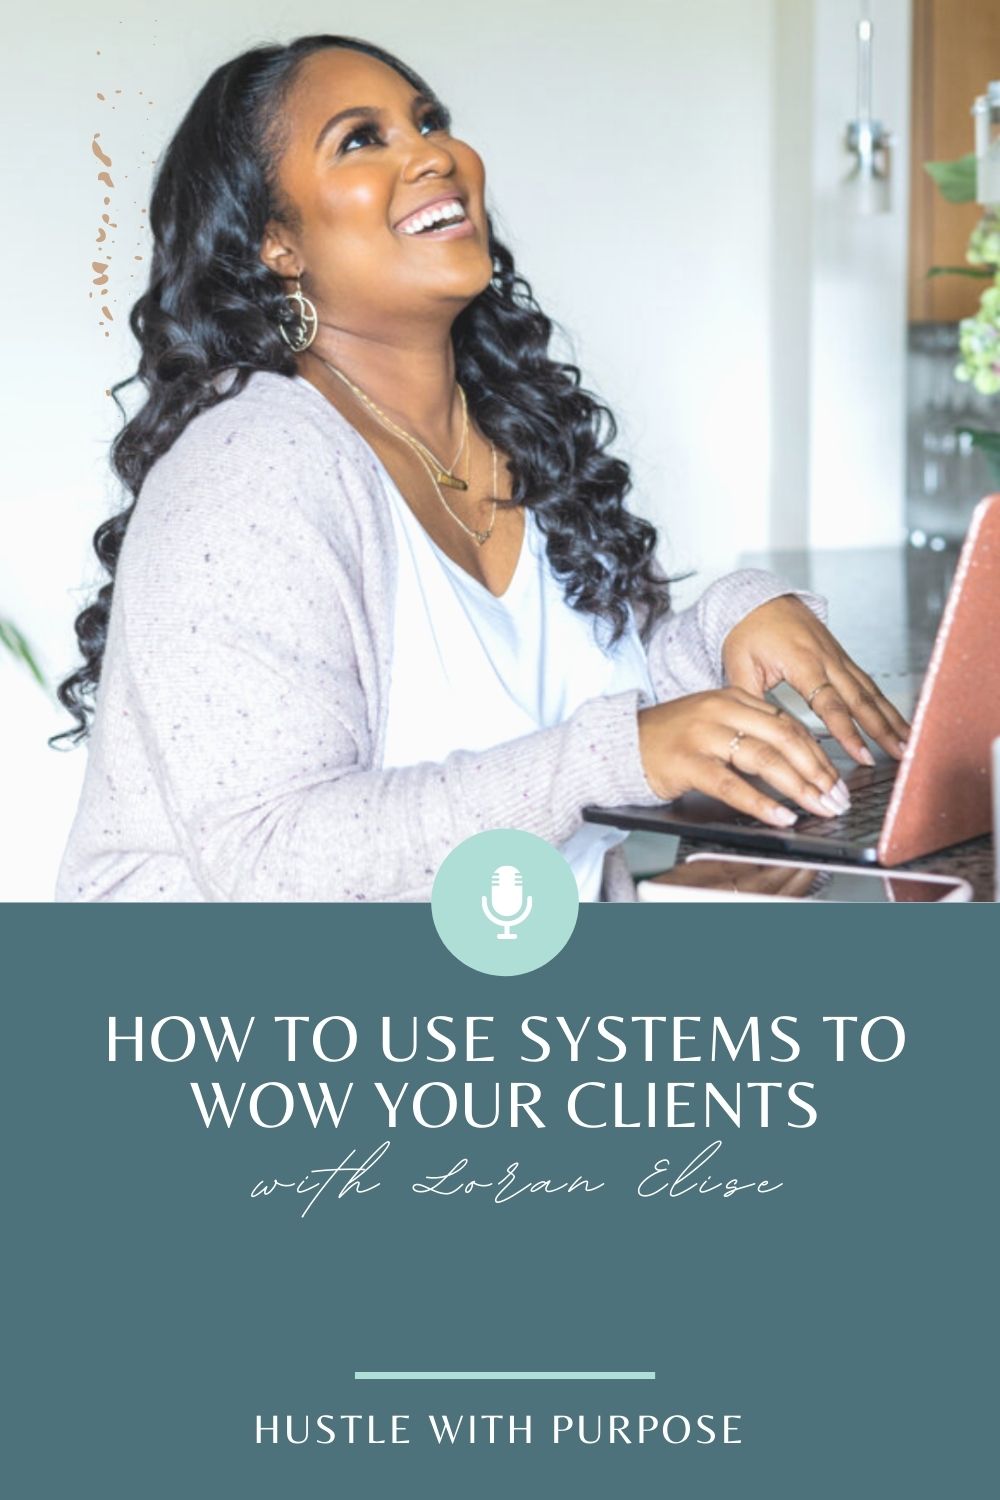 How to Use Systems to Wow Your Clients